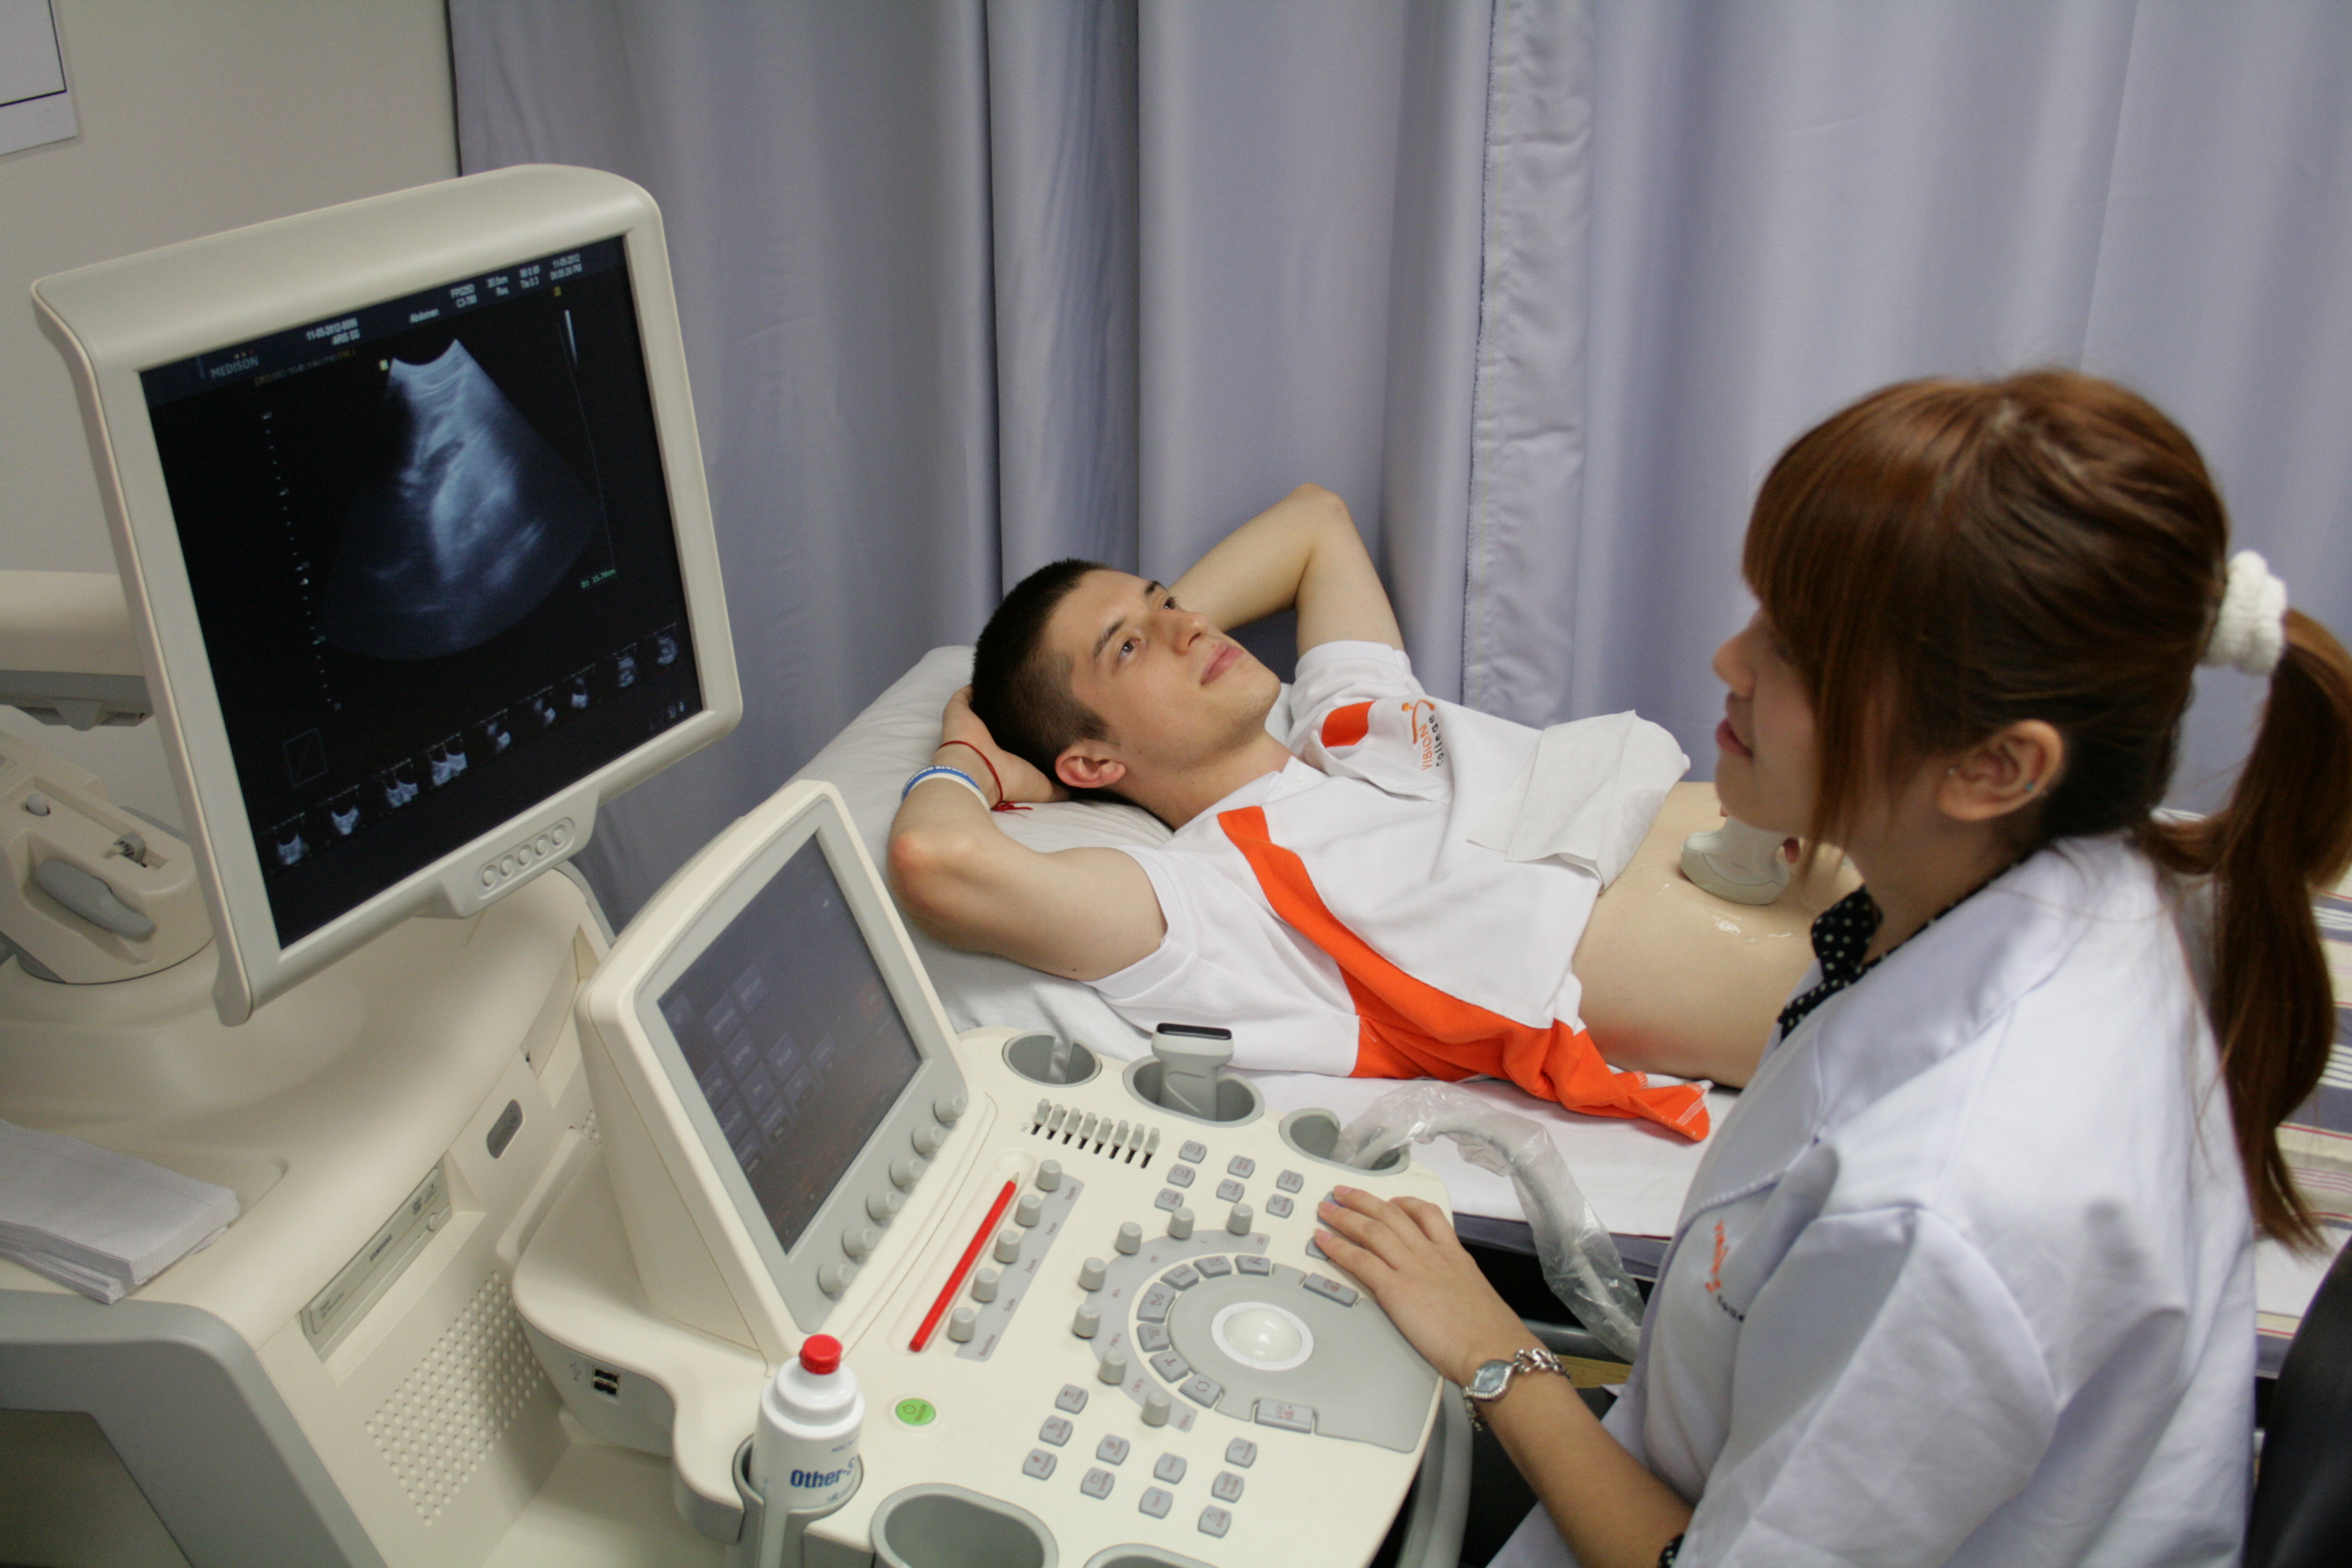 Ultrasound emerging as important diagnostic tool in sports medicine